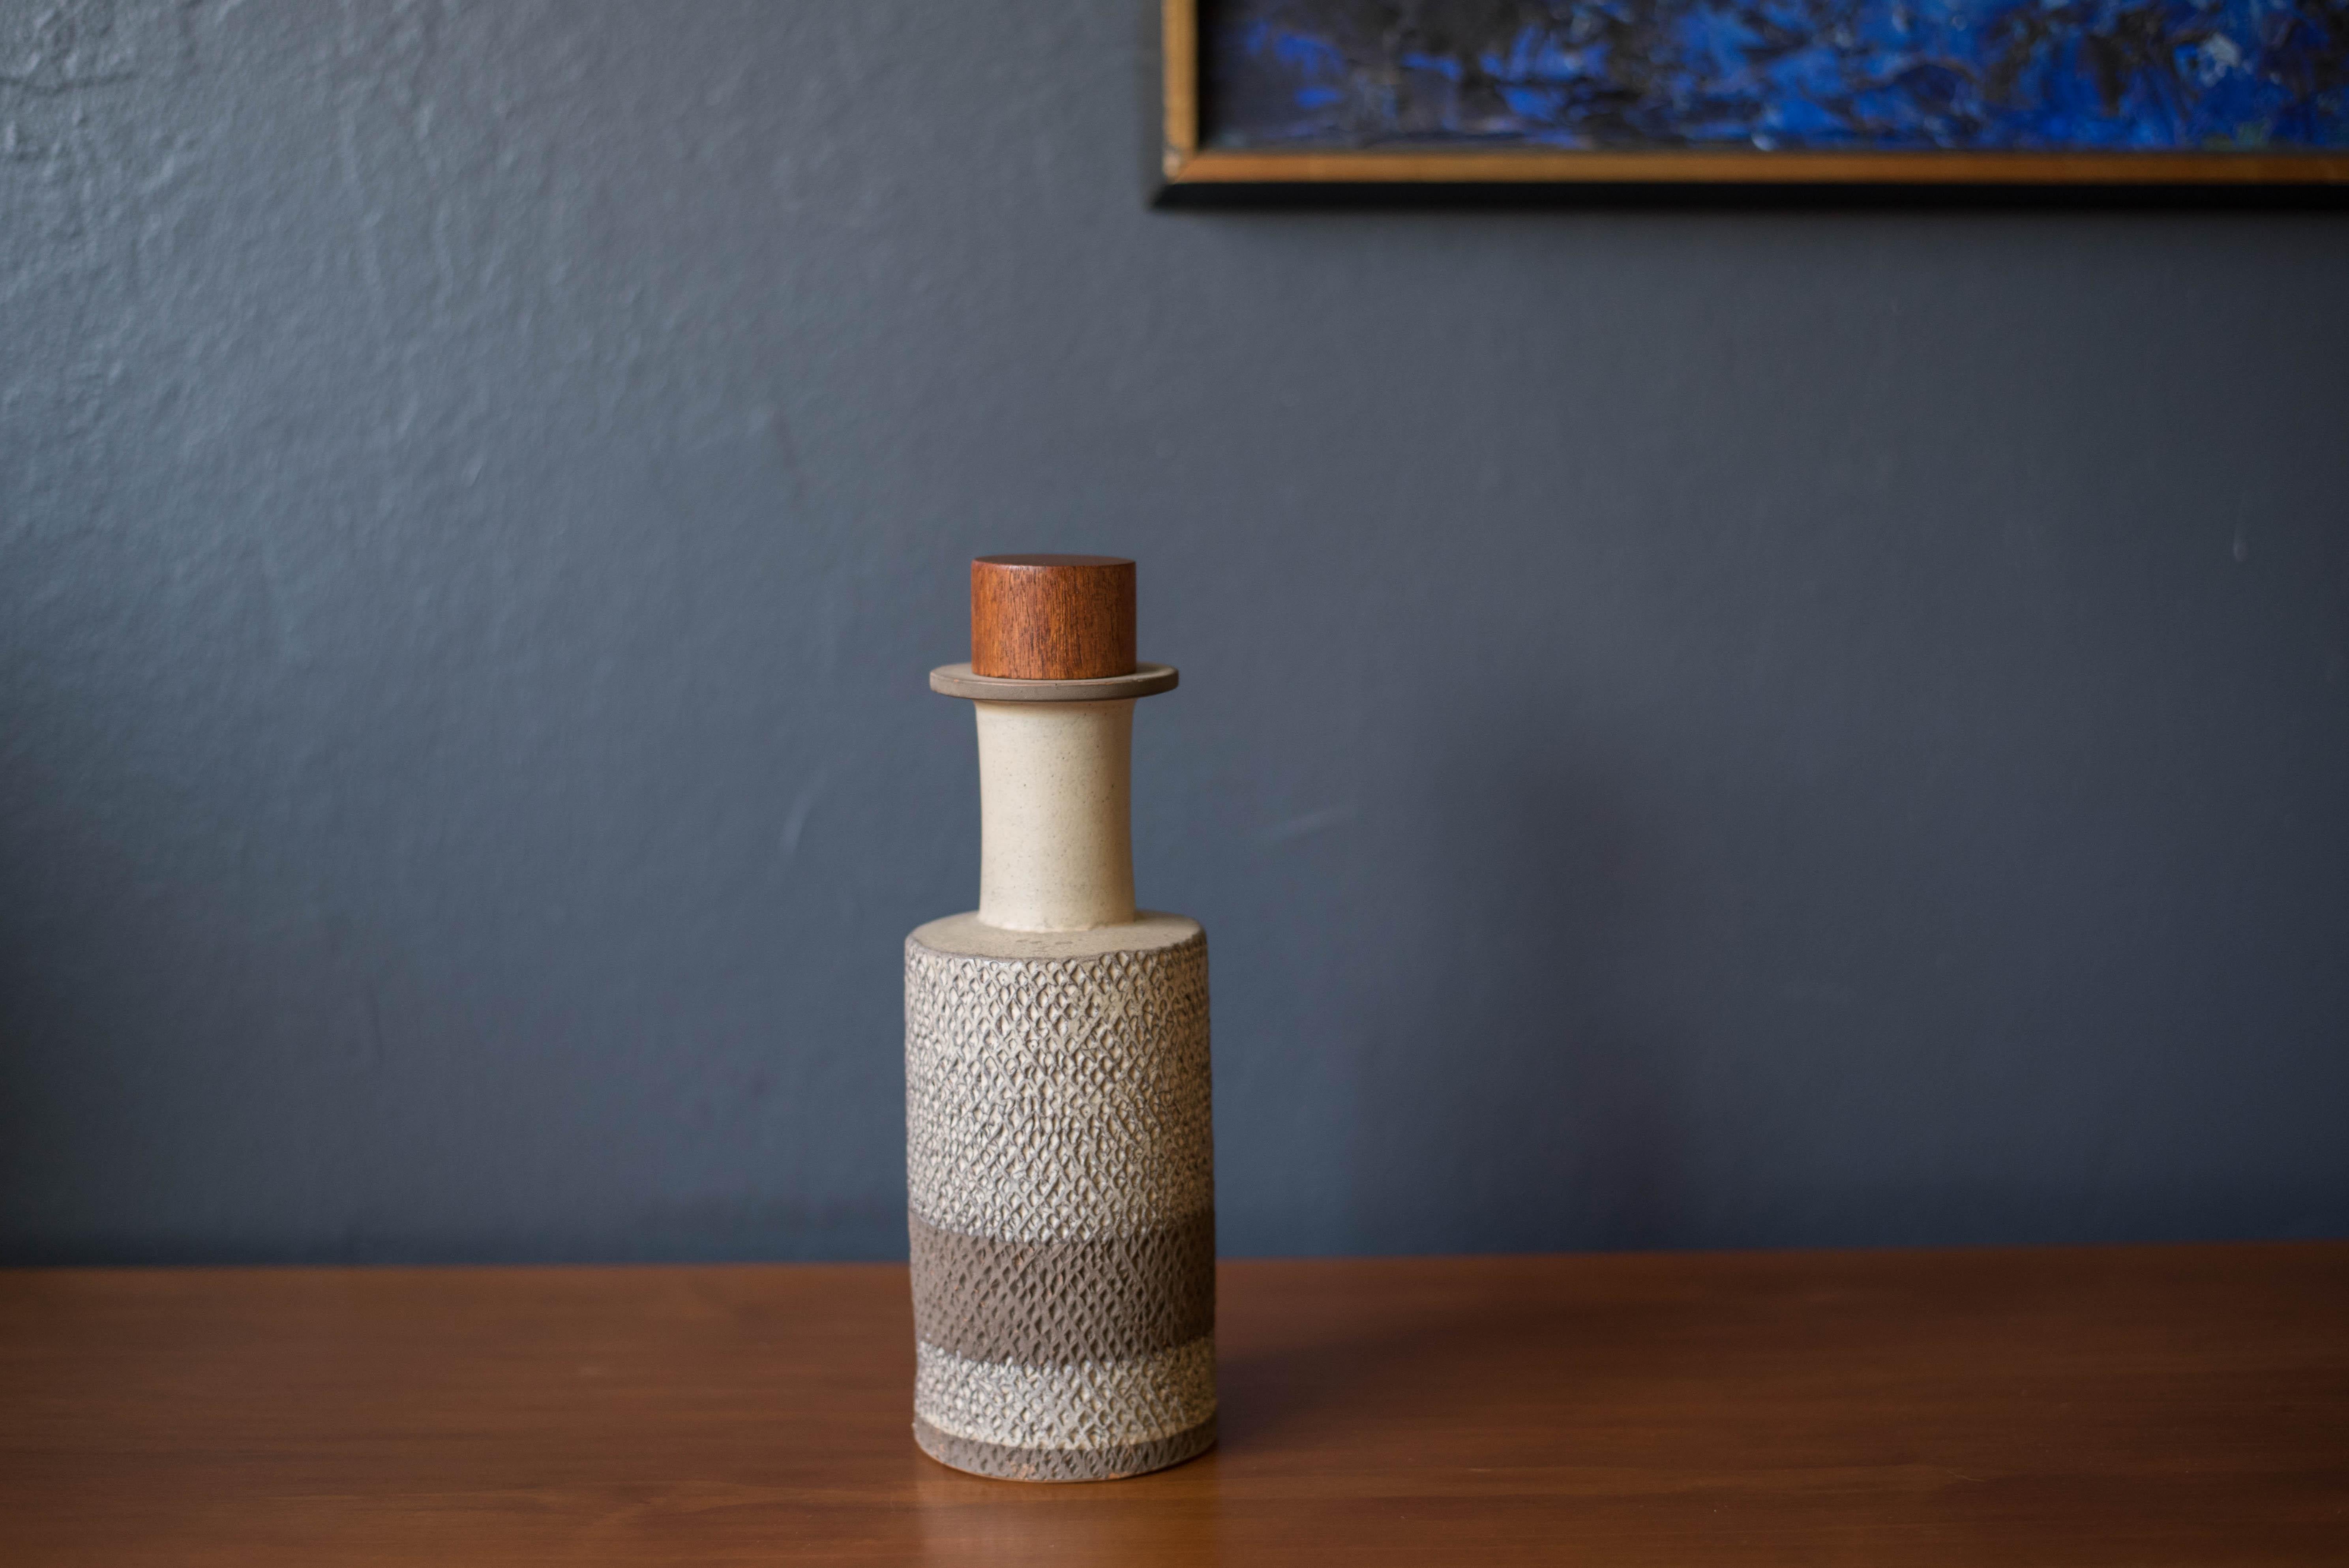 Vintage Bitossi ceramic pottery vase imported by Raymor. This contrasting two-toned clay vessel is incised with a diamond pattern in an earth tone matte finish. Fitted with a teak stopper made in Denmark. Handmade with subtle imperfections making